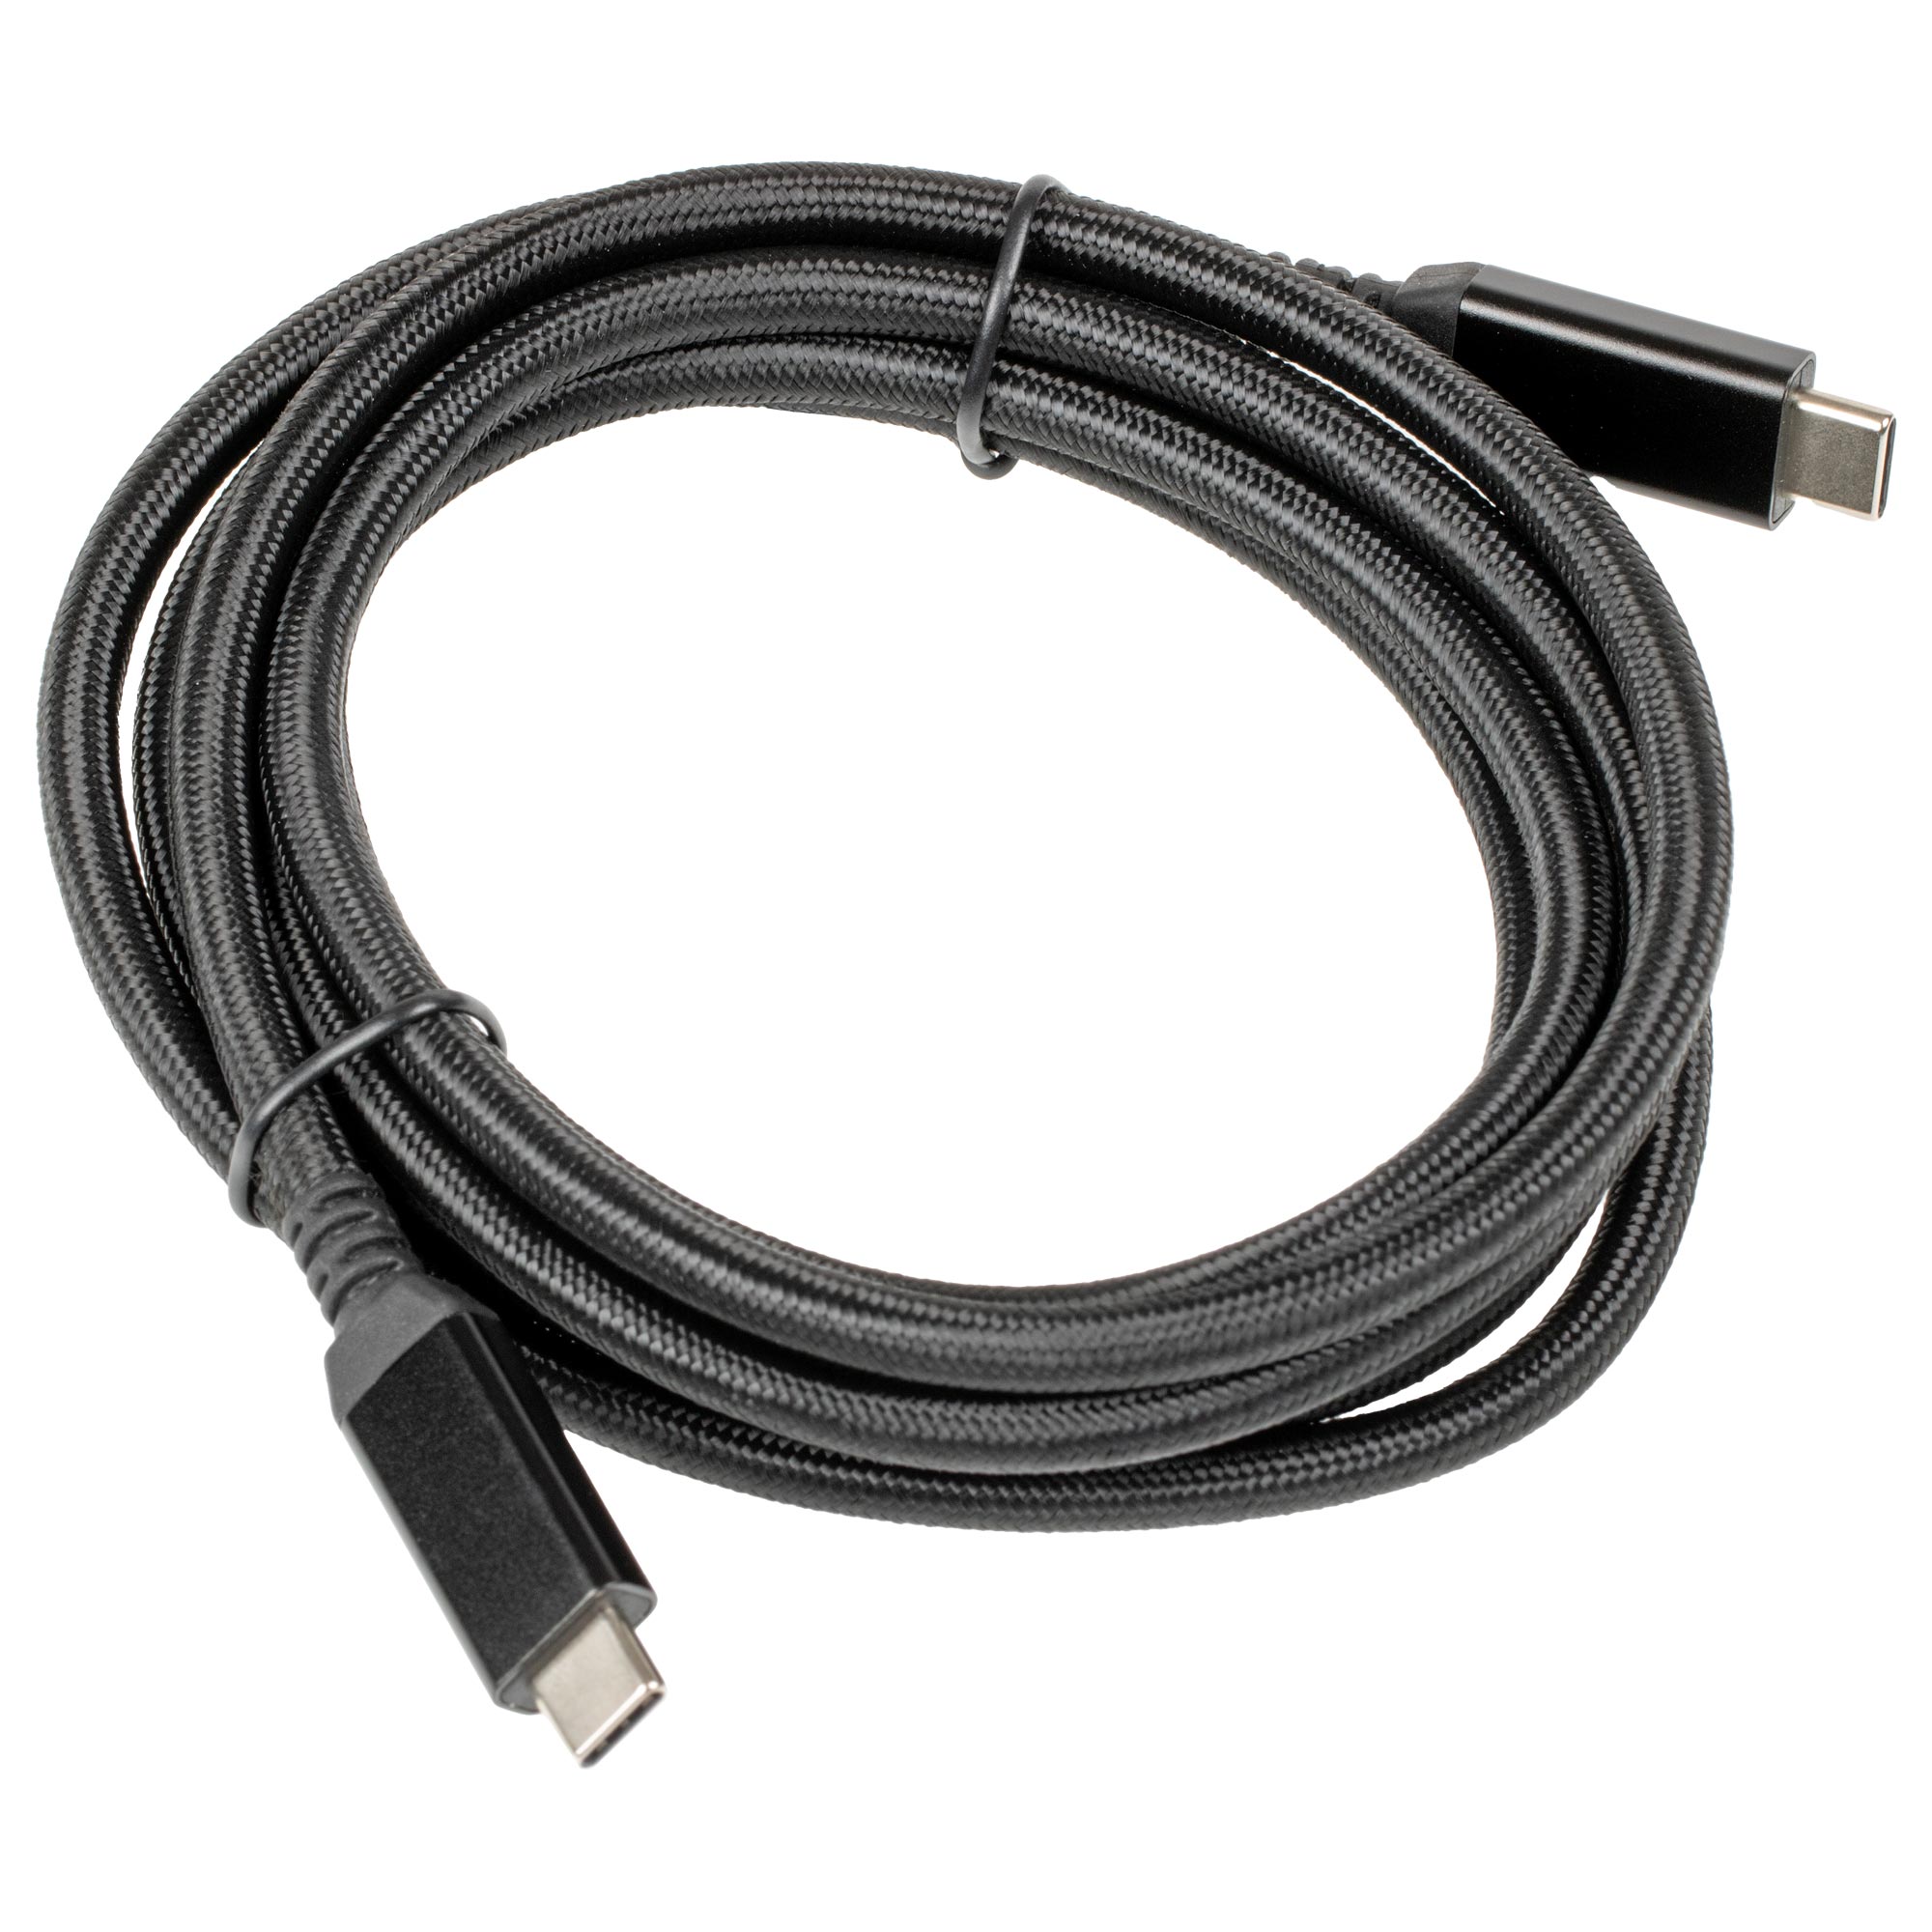 3m Passive Micro USB to HDMI® MHL™ Cable - Cables HDMI® y